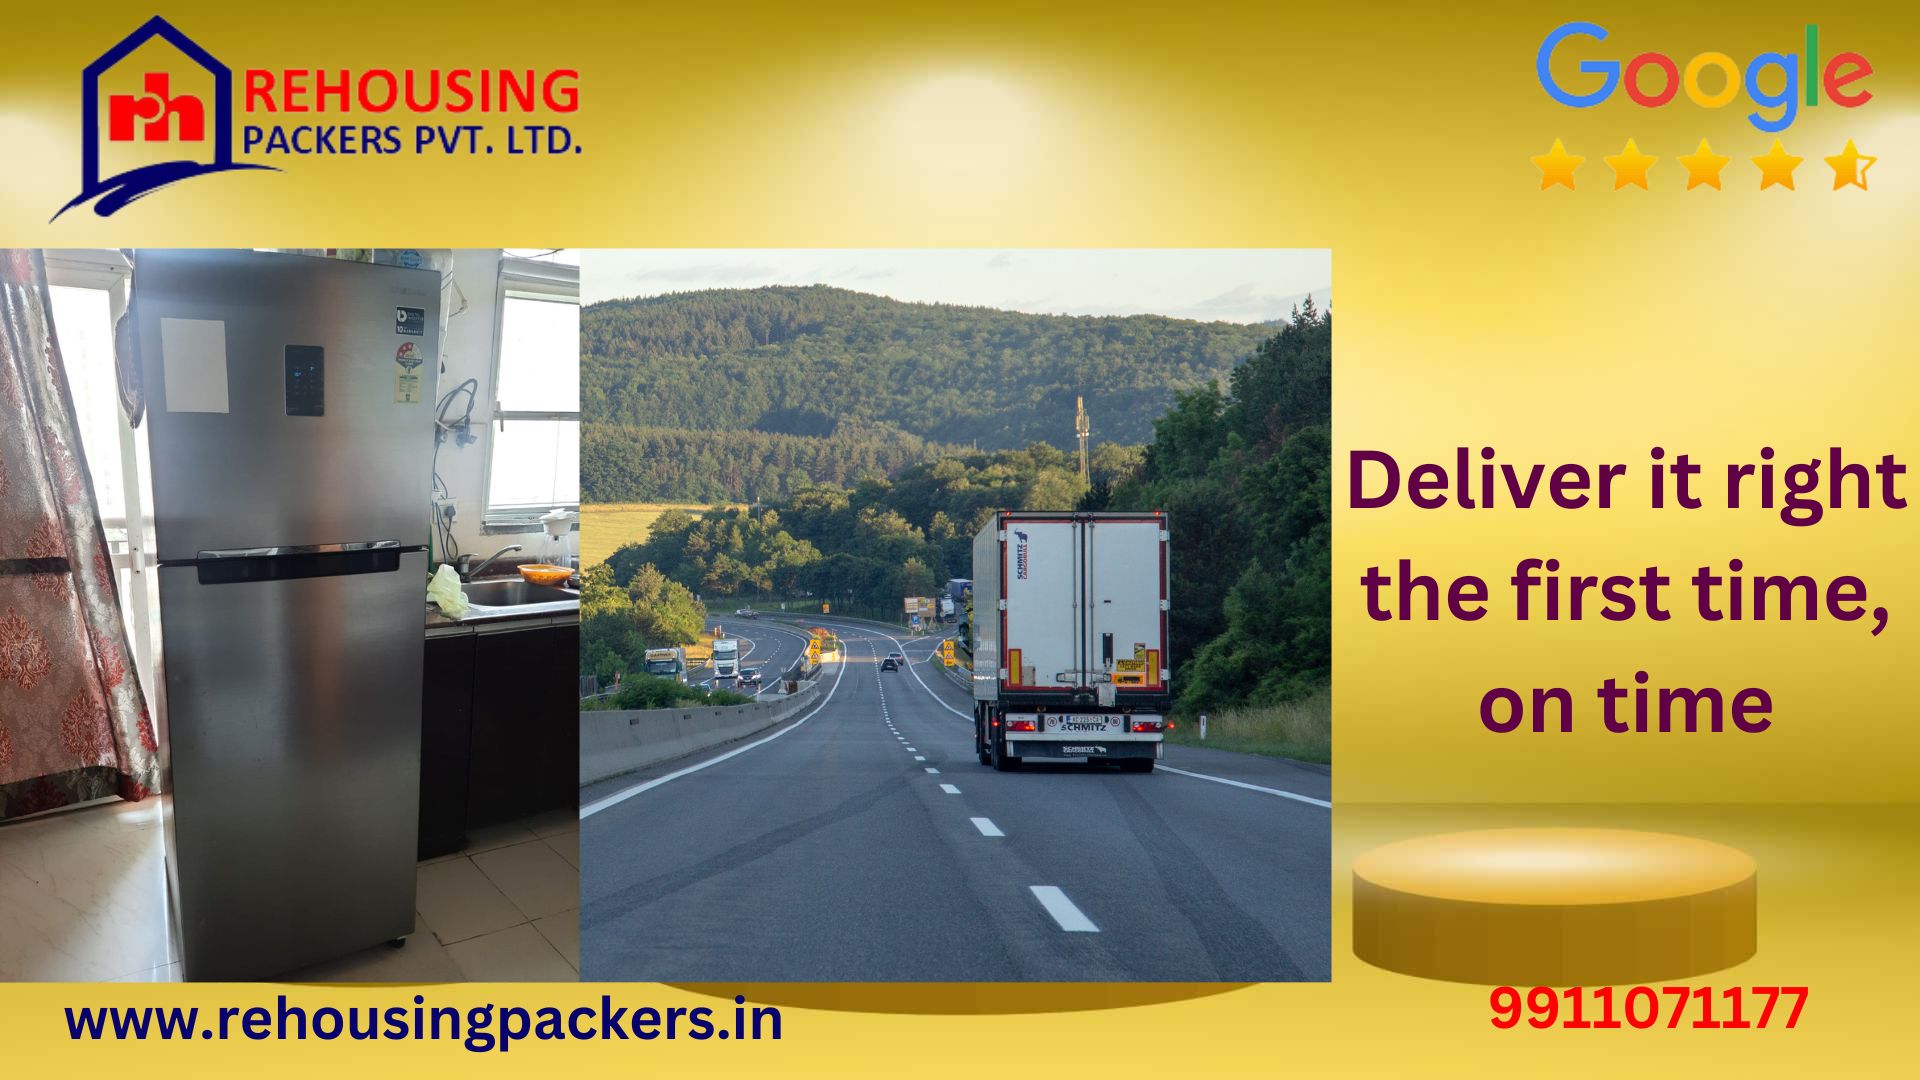 Packers and Movers from Bhubaneswar to Delhi